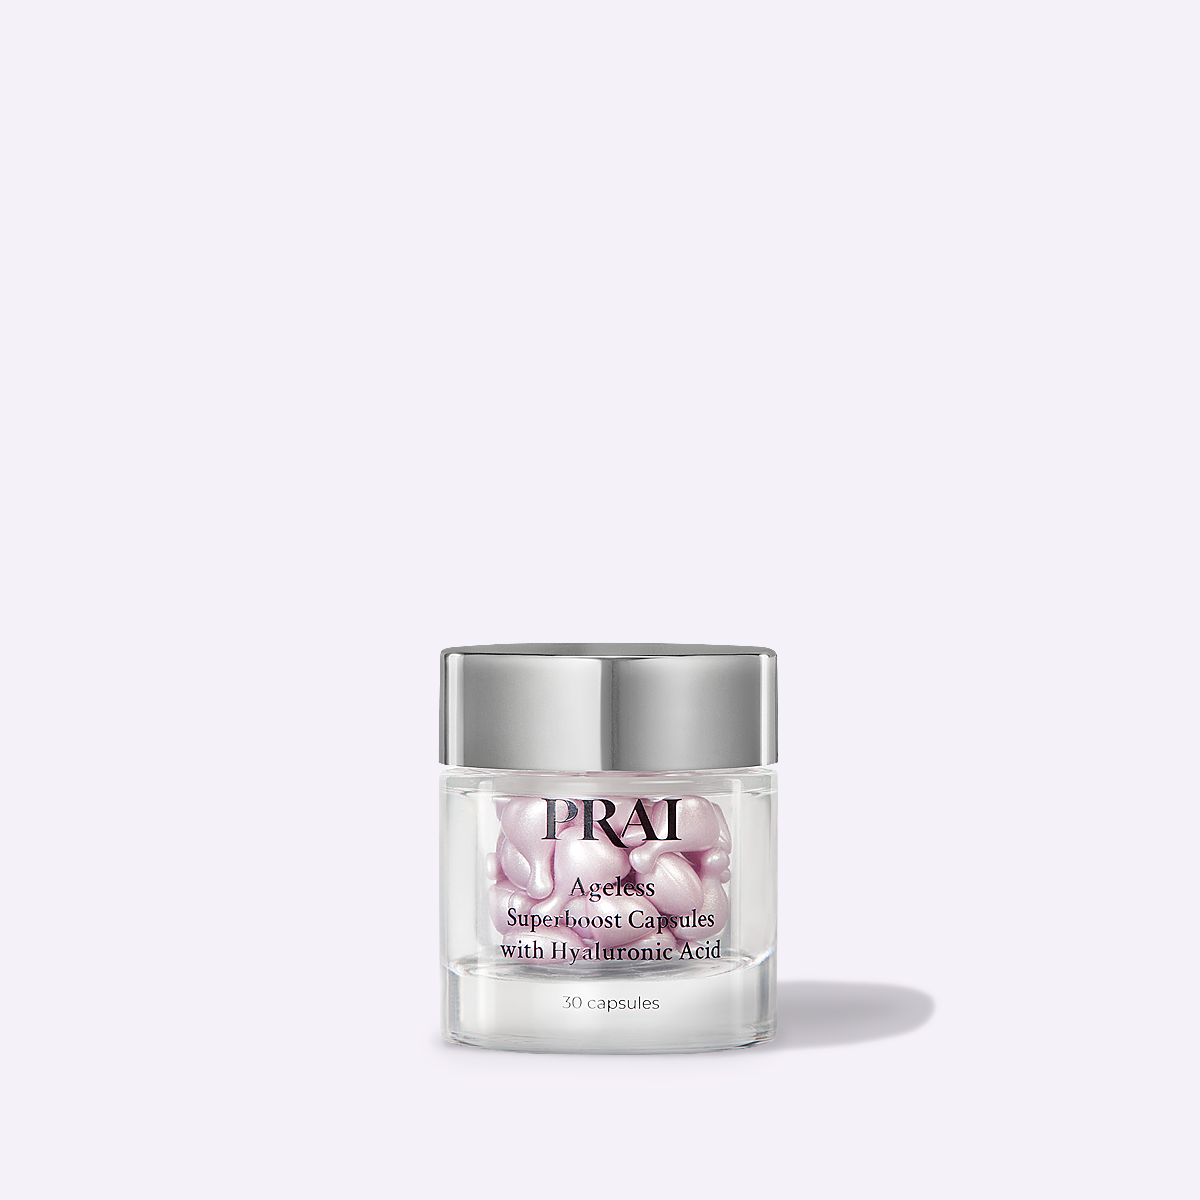 PRAI Beauty Ageless Superboost Serum Capsules with Hyaluronic Acid